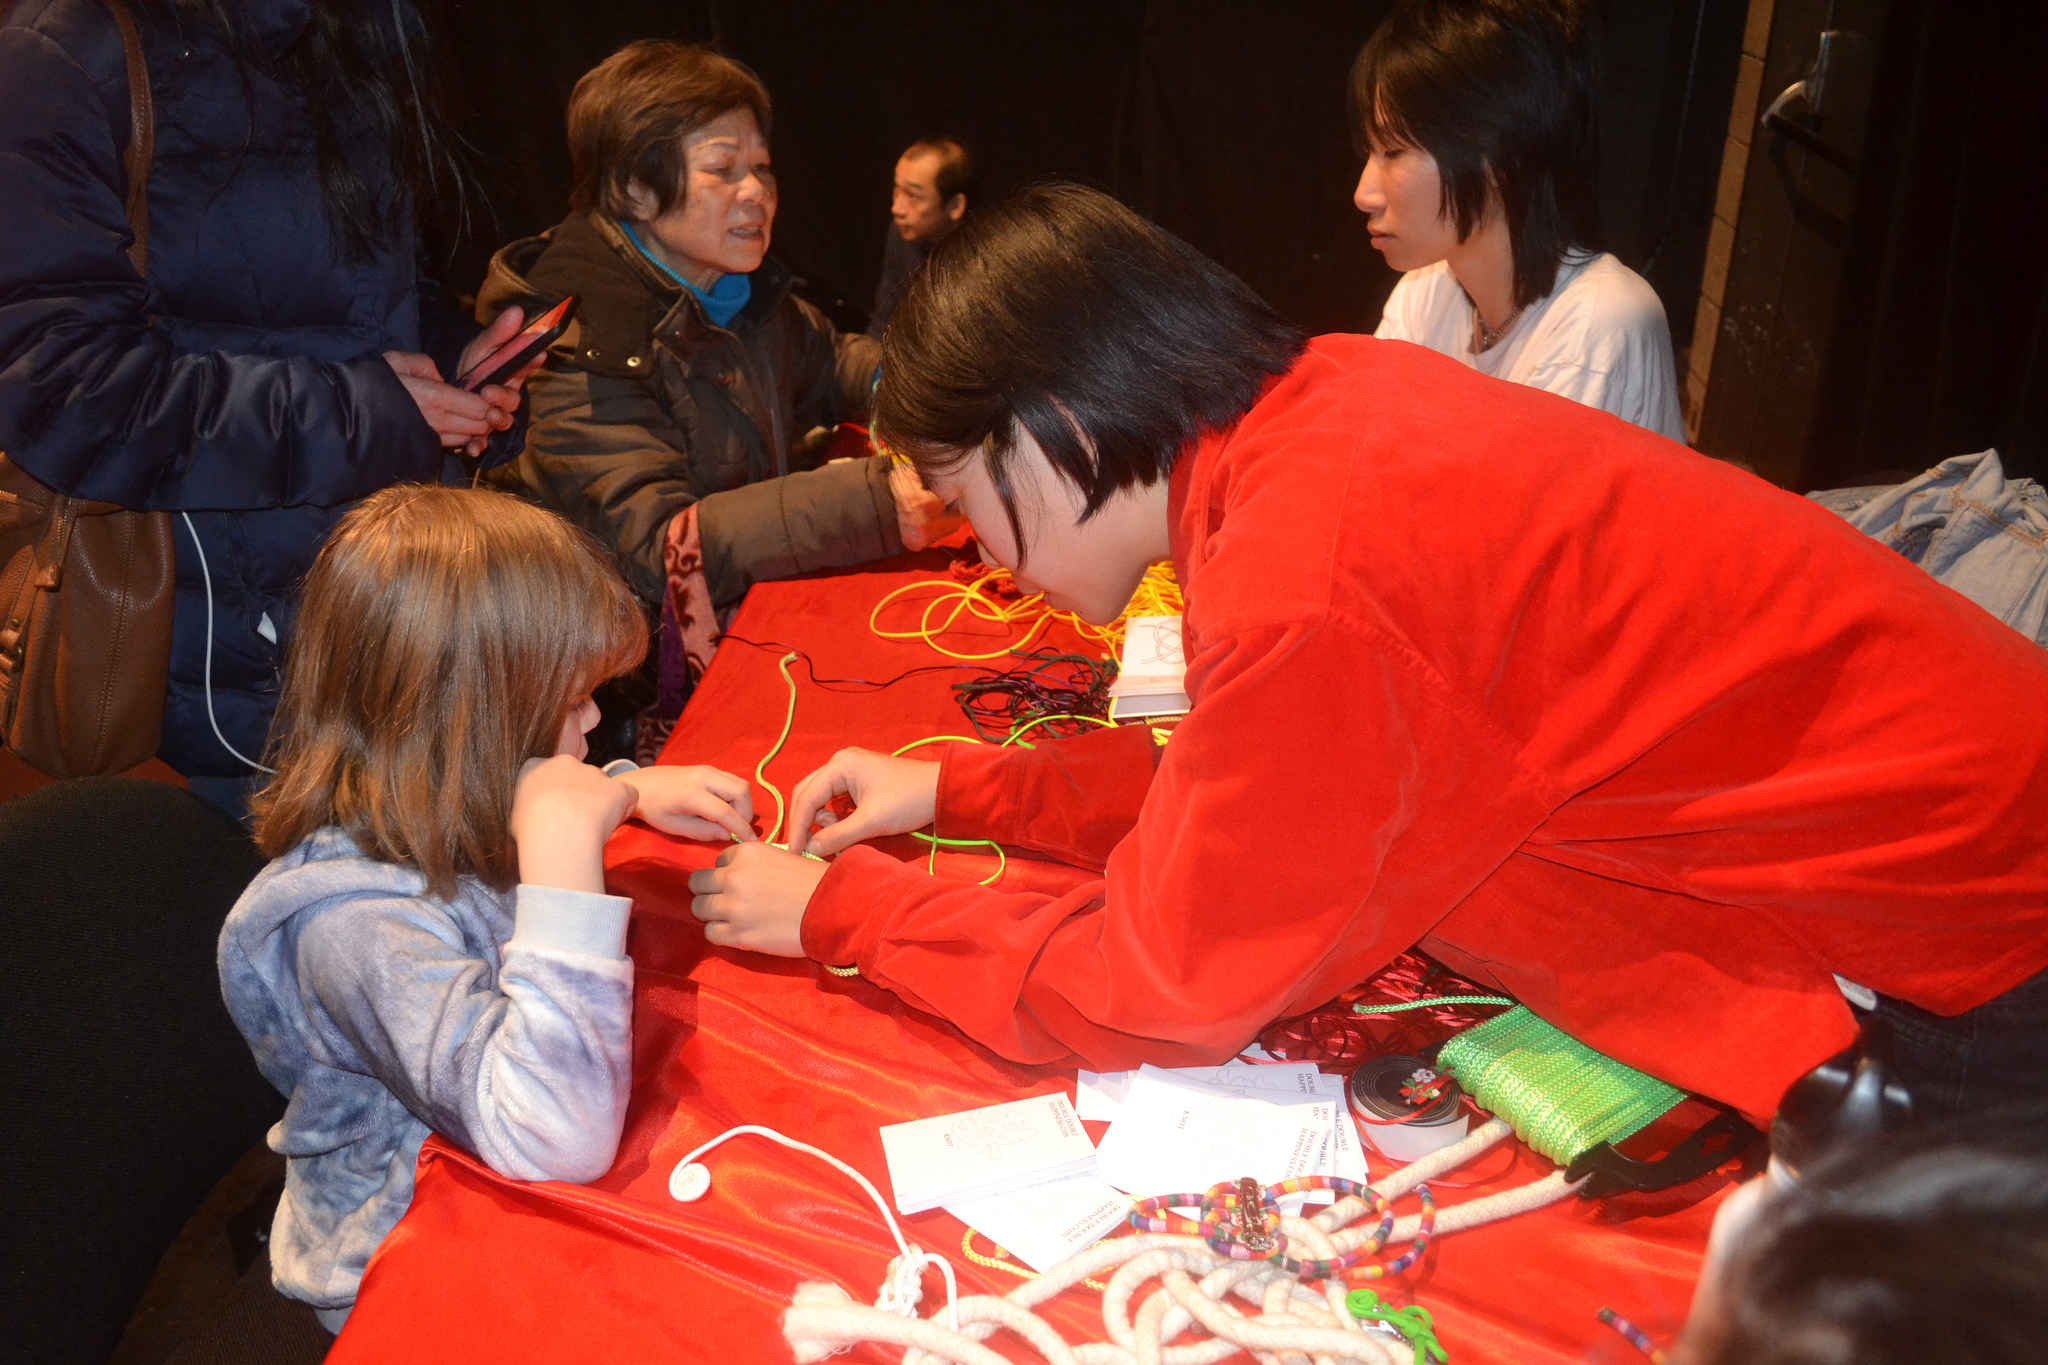 Children and artwork at Lunar New Year event